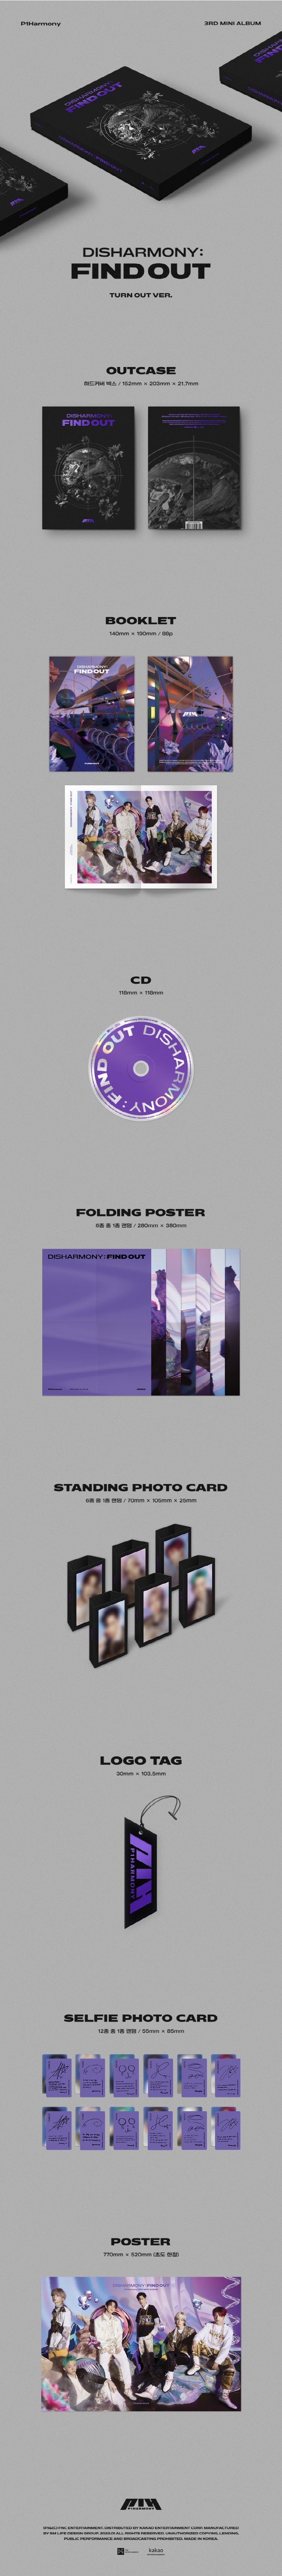 1 CD
1 Booklet
1 Folding Poster (random out of 6 types)
1 Lenticular Photo Card (random out of 6 types) or 1 Standing Phot...